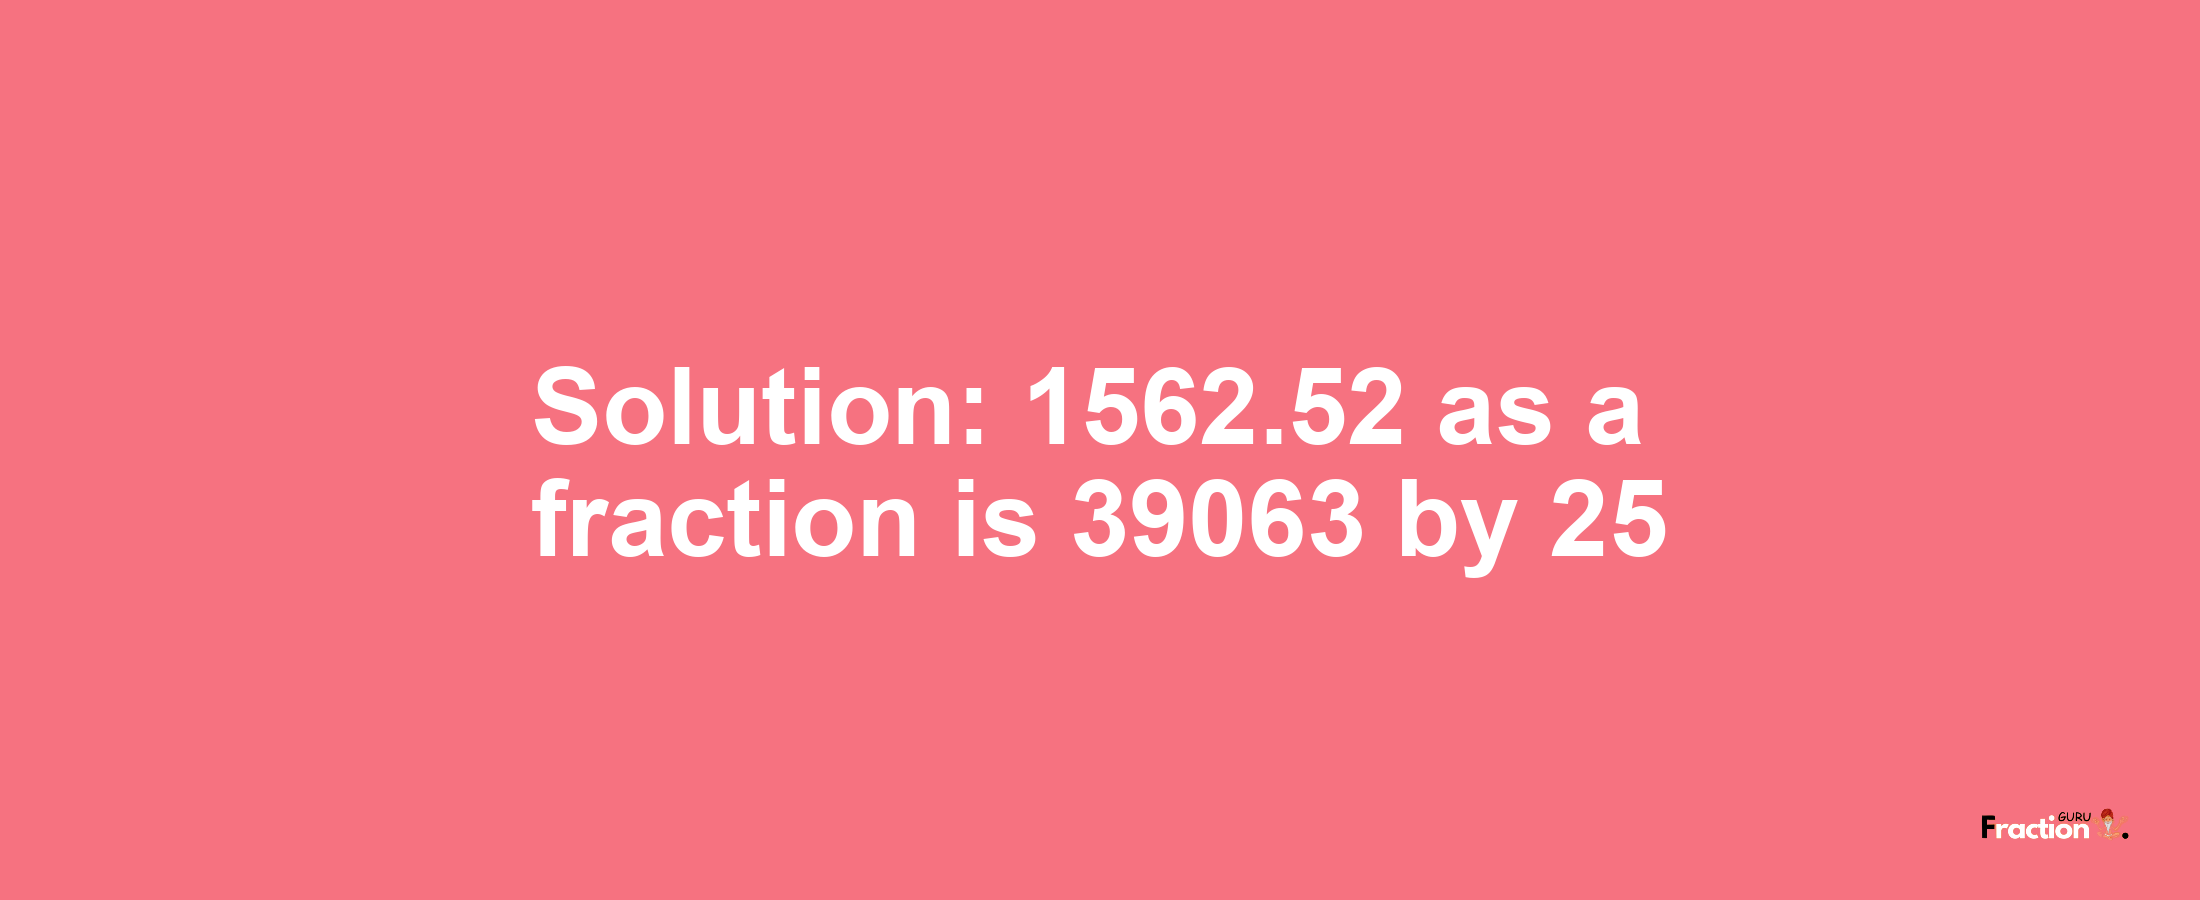 Solution:1562.52 as a fraction is 39063/25